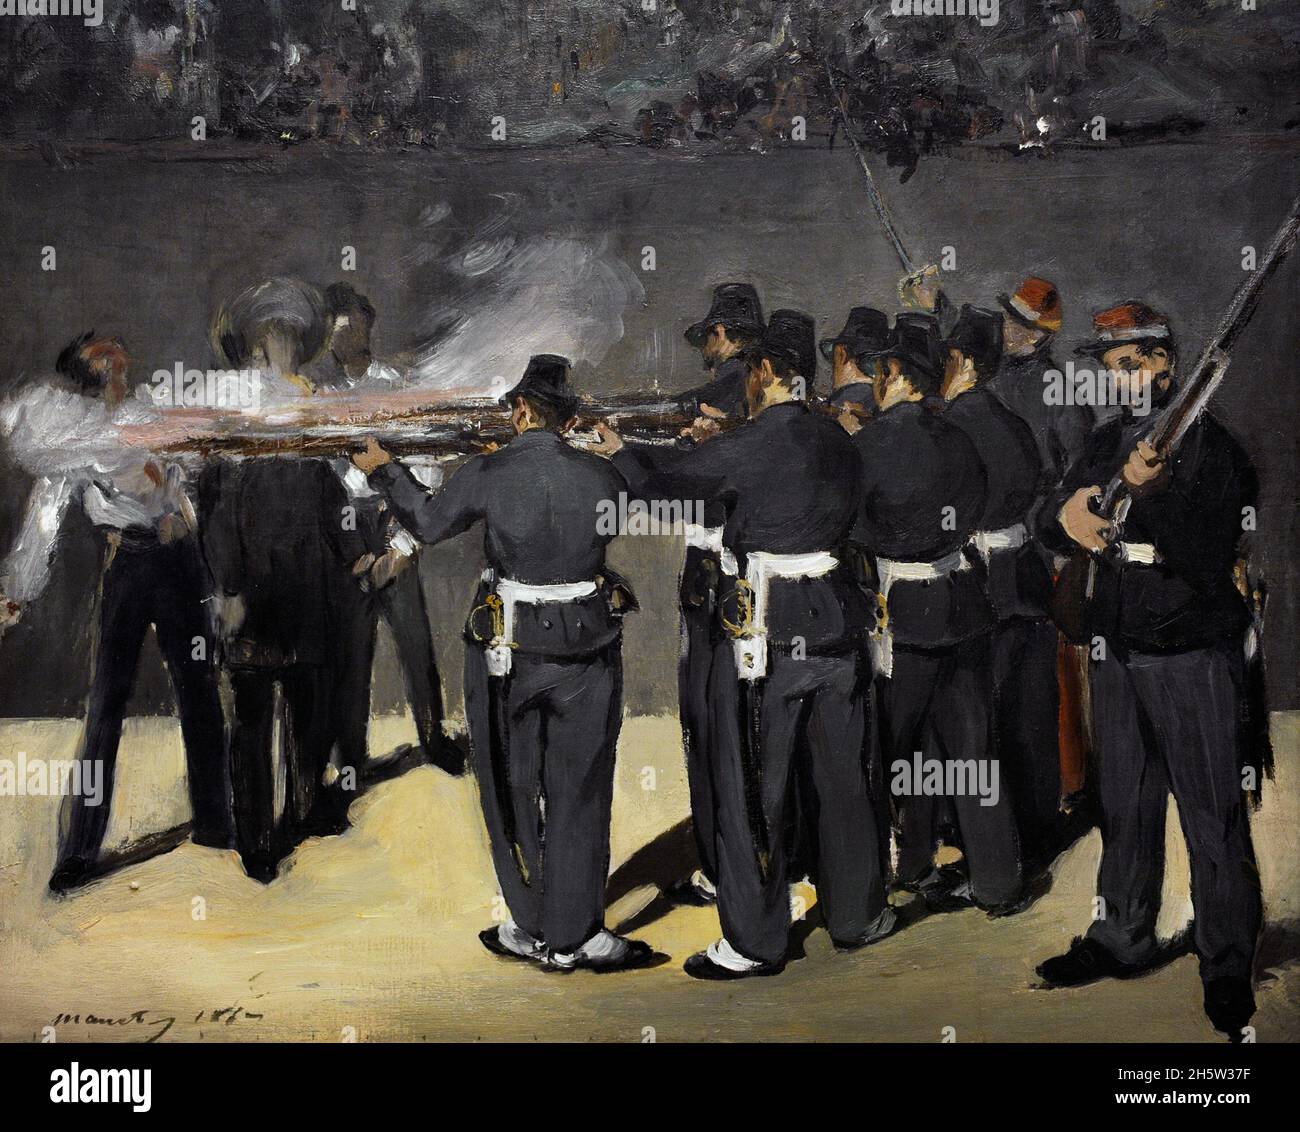 Edouard Manet (1832-1883). French Impressionist painter. The Execution of Emperor Maximilian, 1867. Oil on canvas (48 x 58 cm). Execution of Archduke Maximilian of Austria, promoted in 1864 to the throne of Mexico by Napoleon III, in Querétaro on June 19, 1867. Ny Carlsberg Glyptotek. Copenhagen, Denmark. Stock Photo